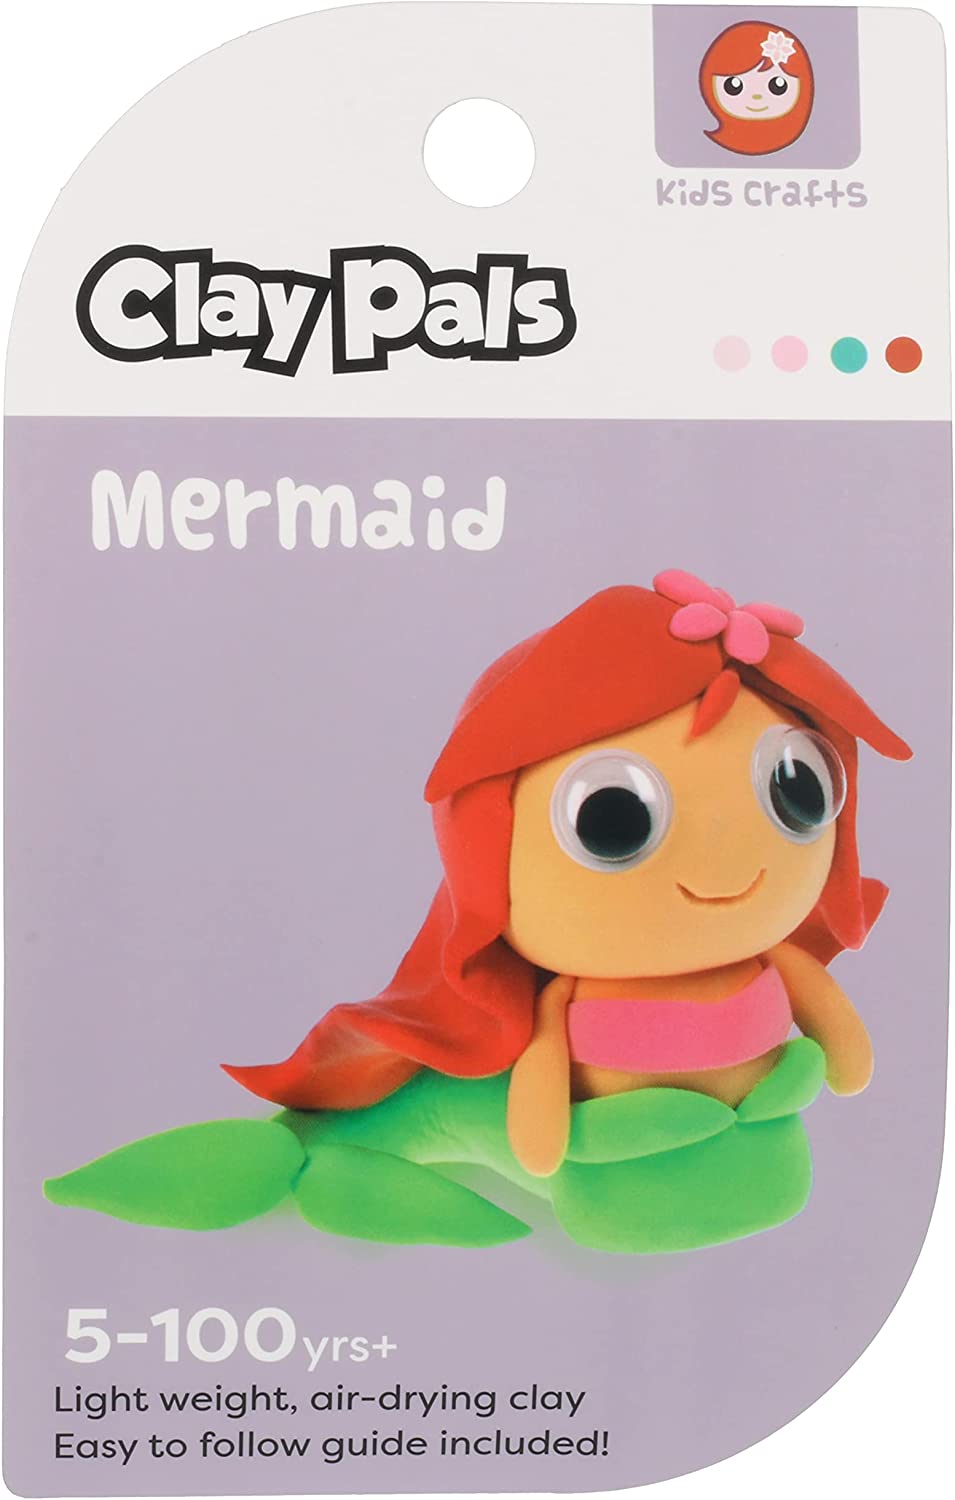 Clay Pals modelling clay sets - 24 varieties